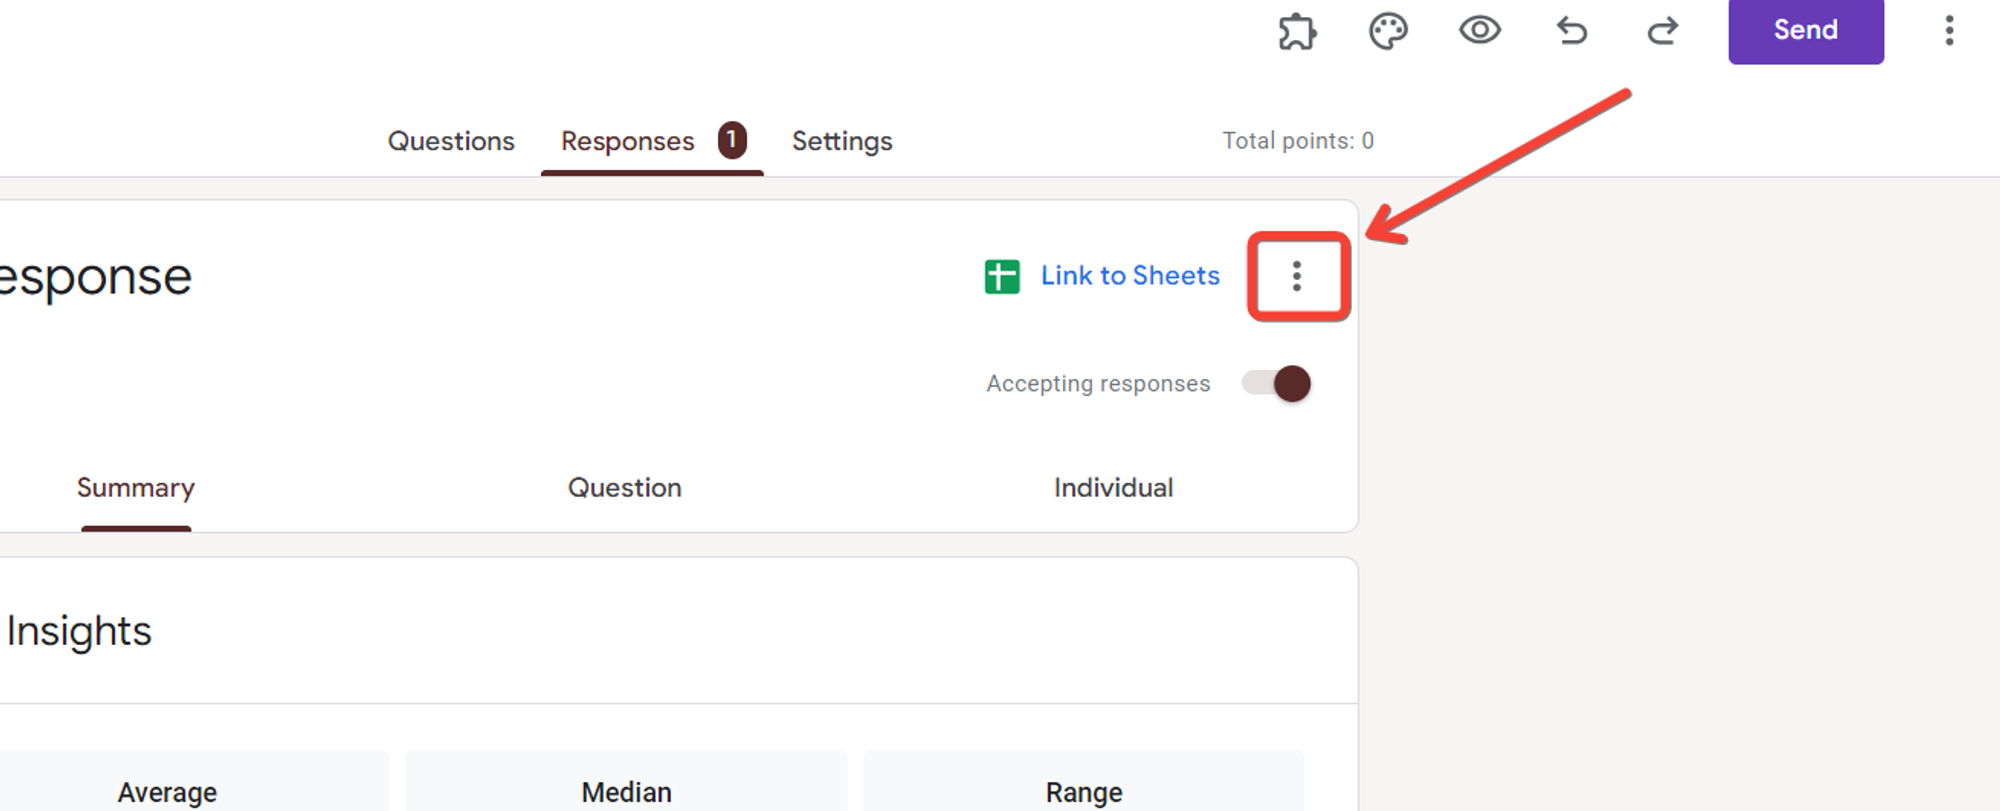 How to delete a response from google forms?